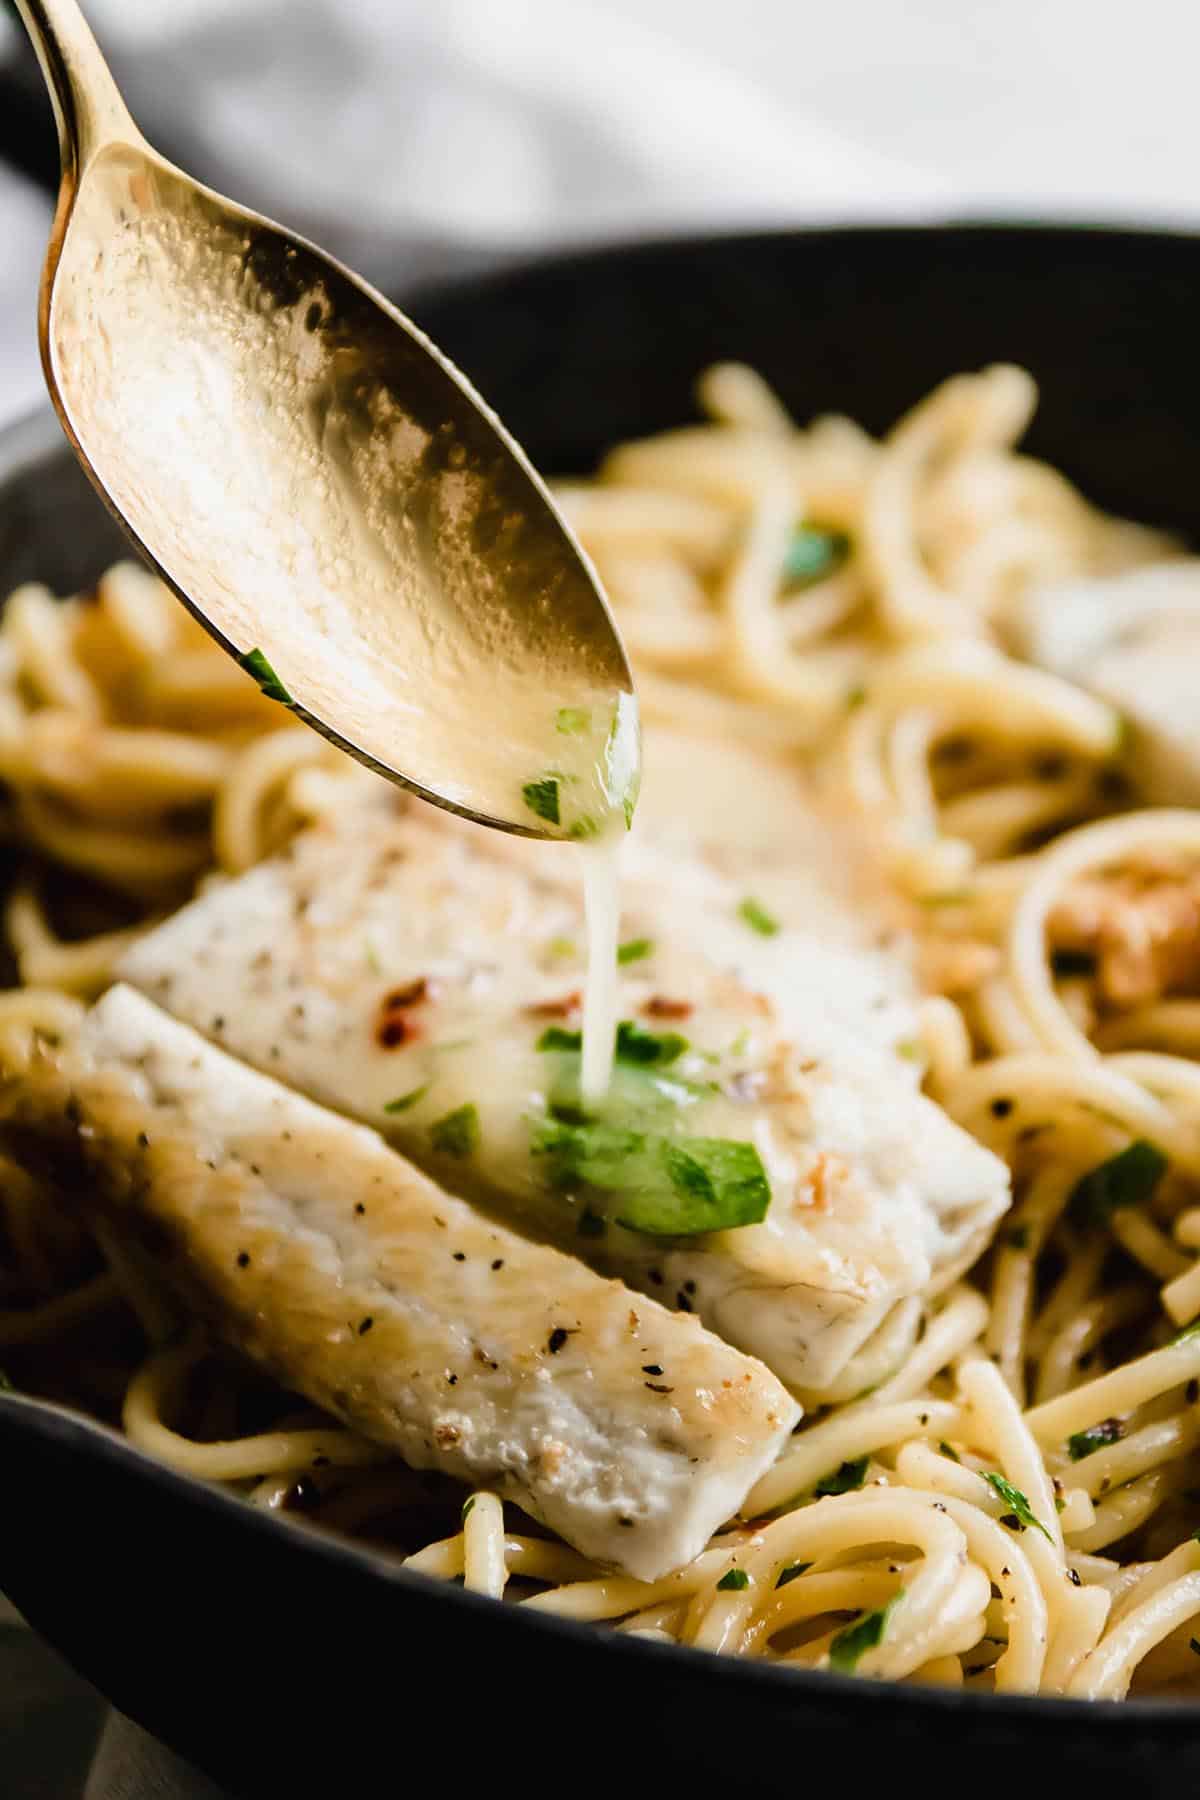 Spoon drizzling lemon sauce over fish and pasta.